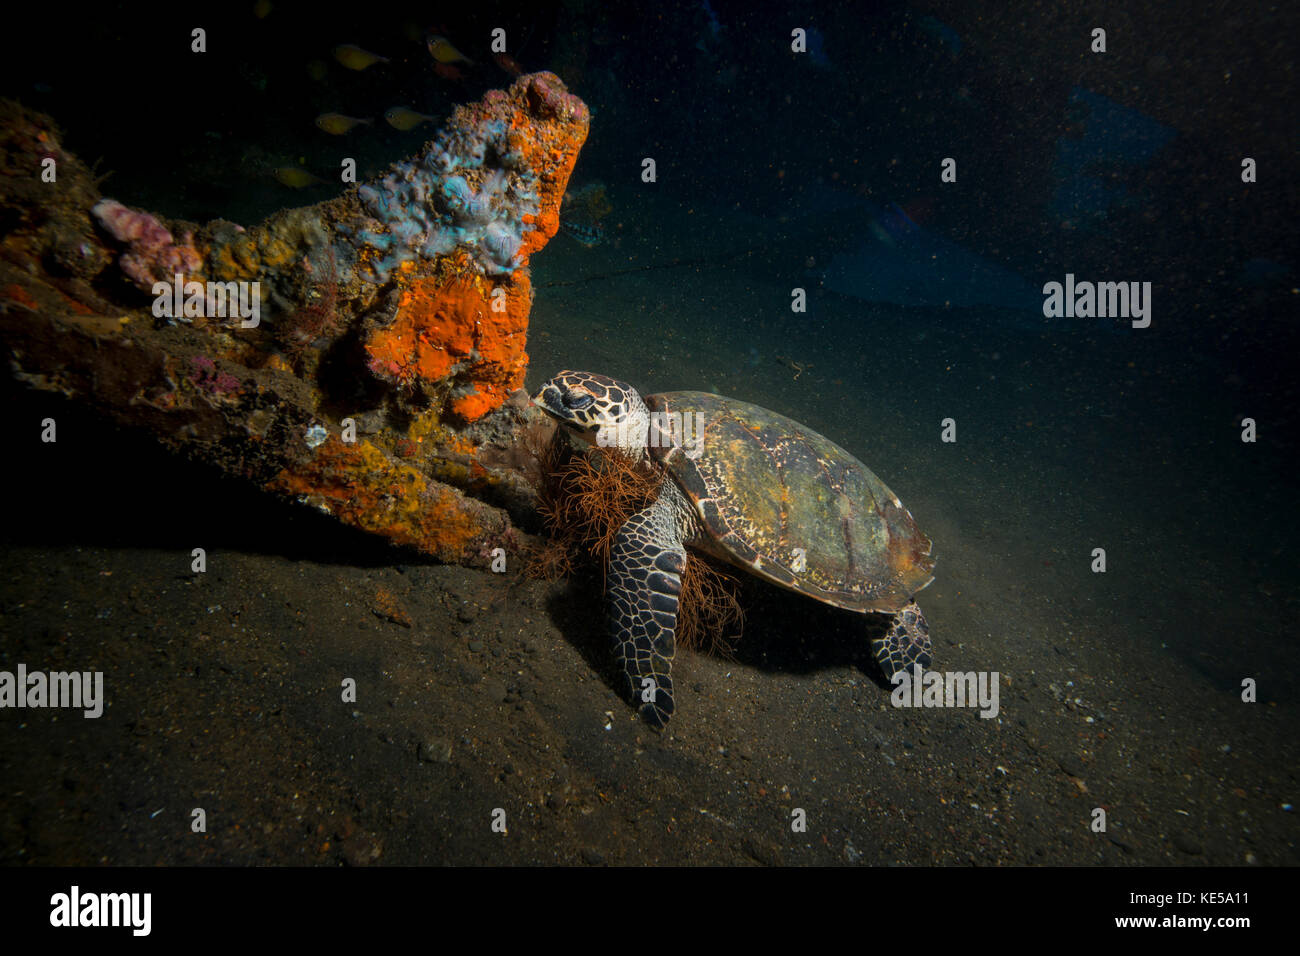 Small green turtle resting inside the Liberty Wreck, Bali, Indonesia. Stock Photo